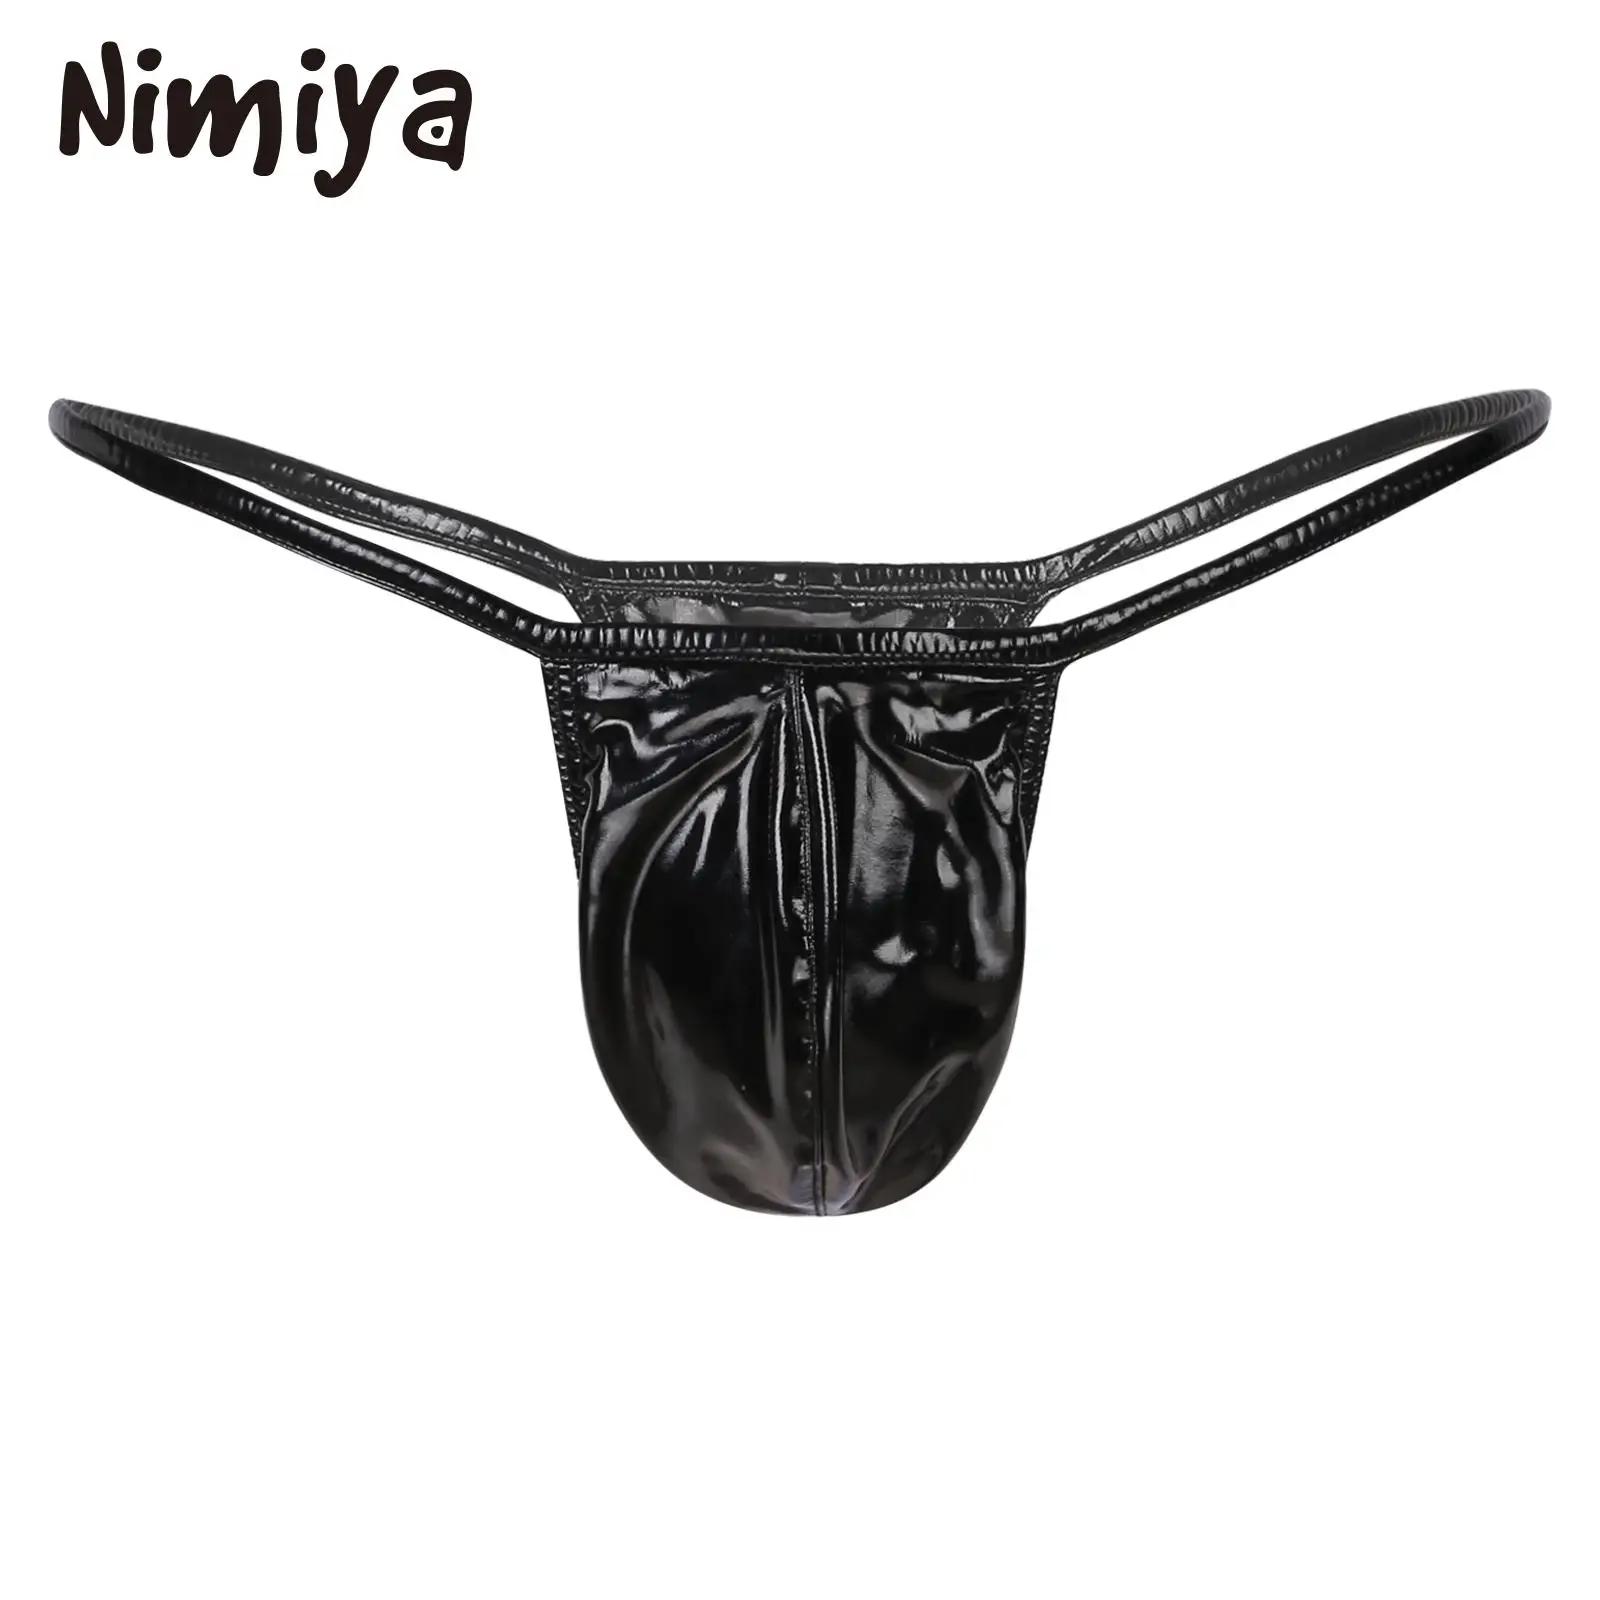 

Nimiya Mens Wet Look Bulge Pouch Pu Leather Glossy Thongs Low Waist G-strings Elastic Waistband T-back Underwear for Date Nights